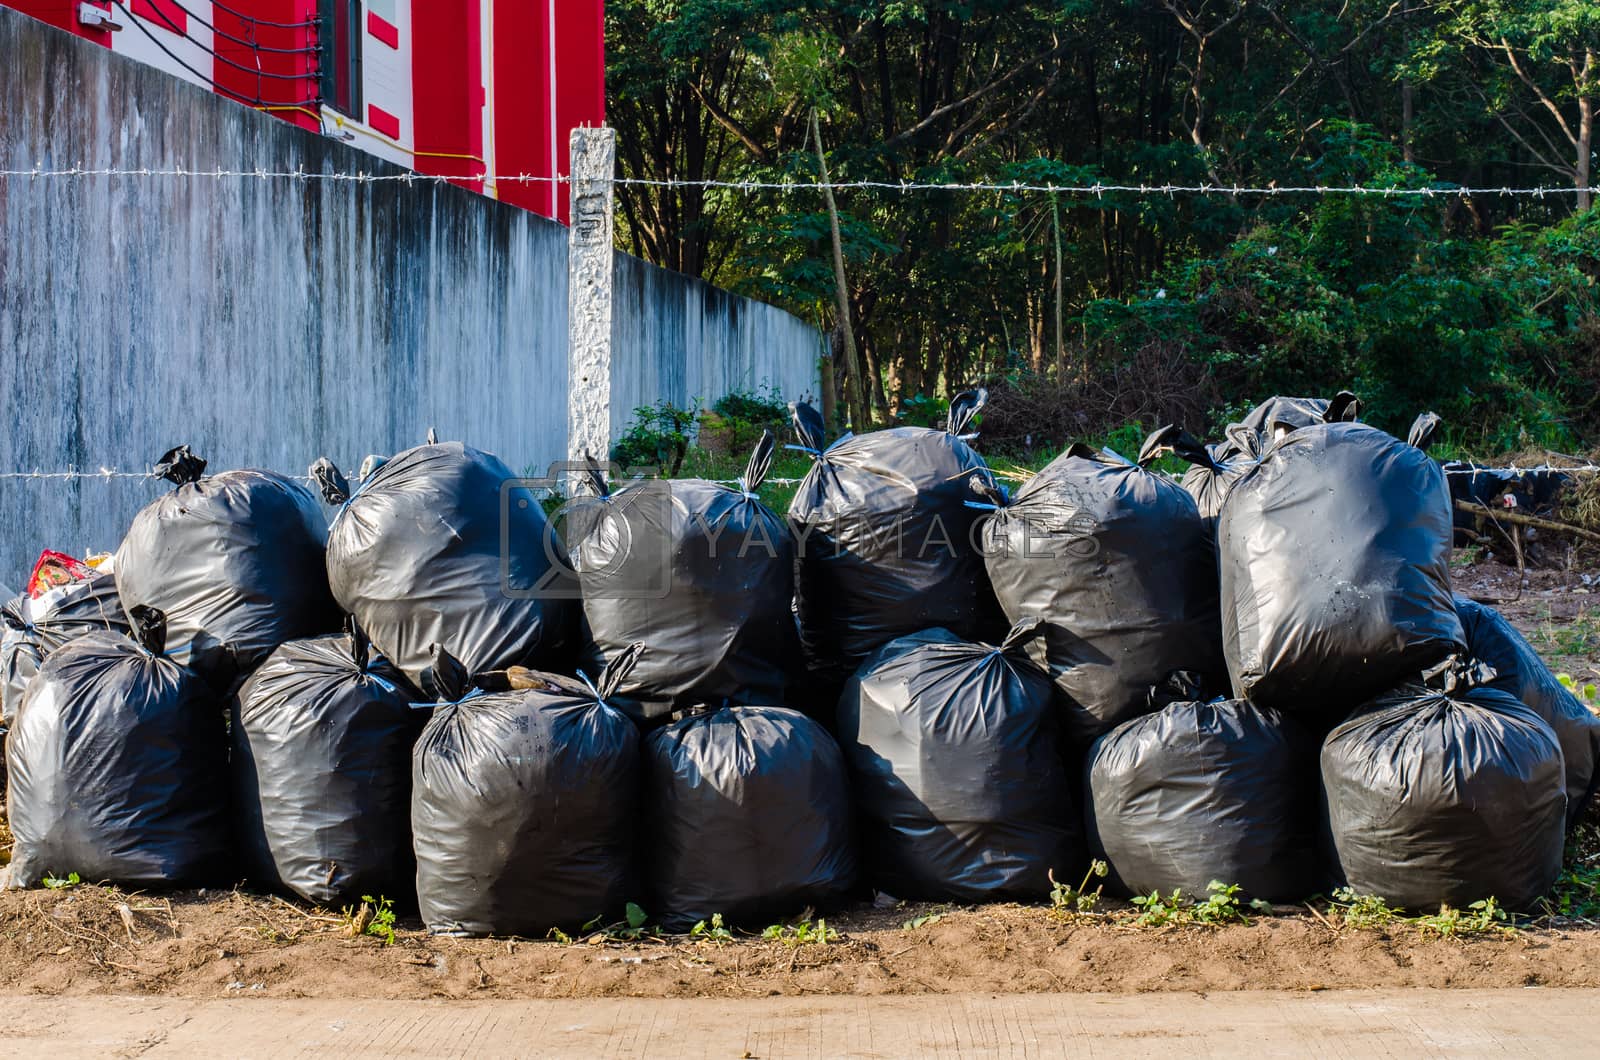 Royalty free image of Garbage bags by photobyphotoboy